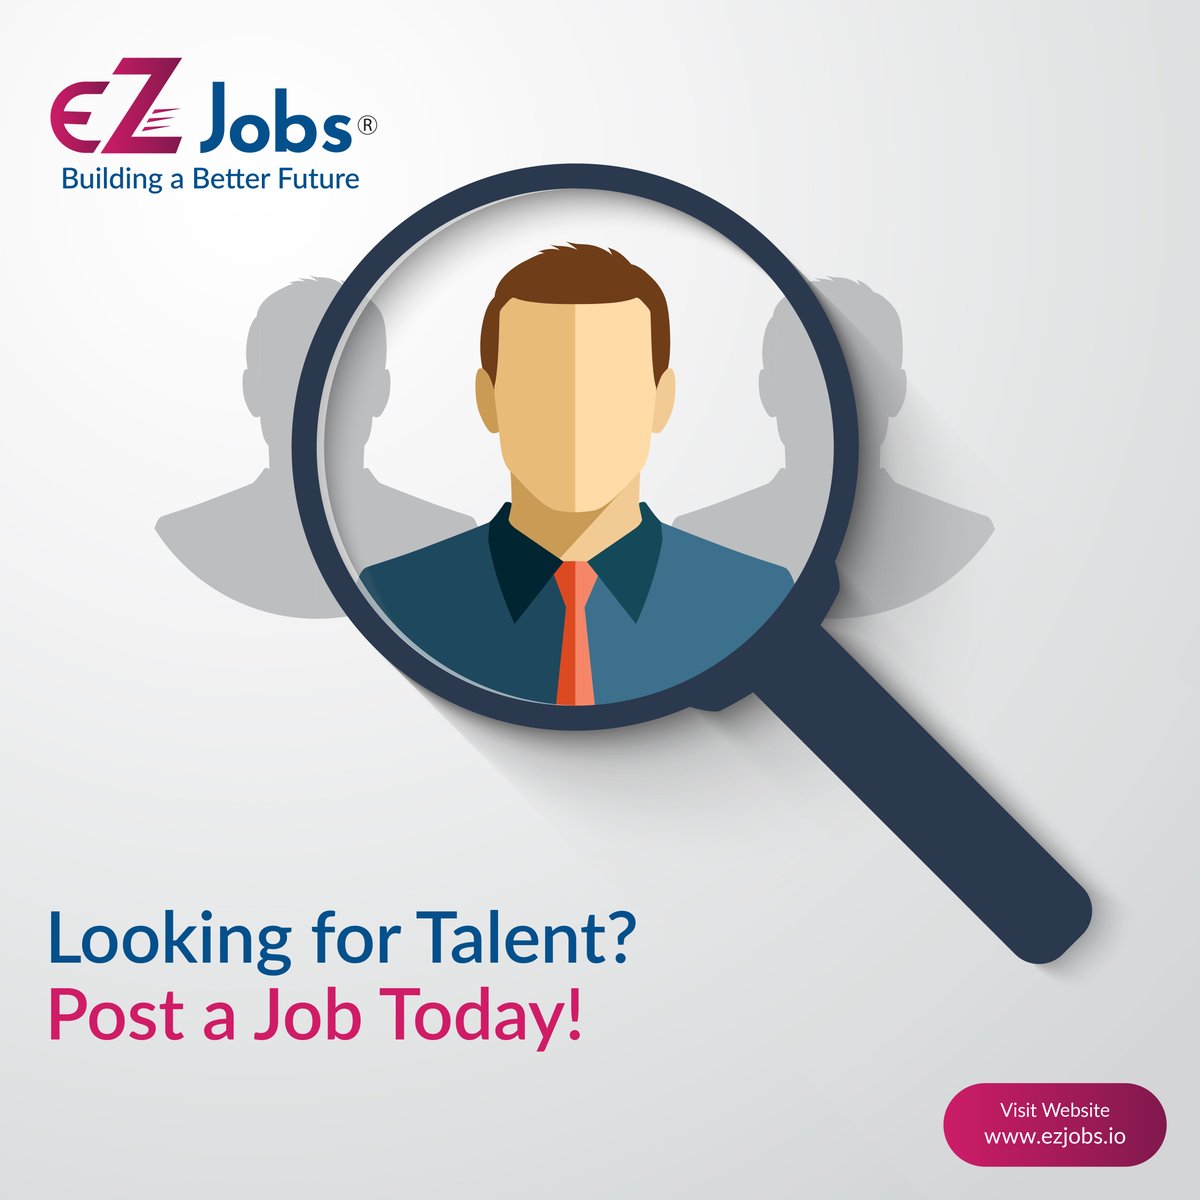 Post a Job and Hire quickly - Hire the best candidates on EZJobs.

#EZJobs #employerbranding #employertips #employerchoice #startuphiring #hiringalert #freejobposting #offcampusdrive #recruiting